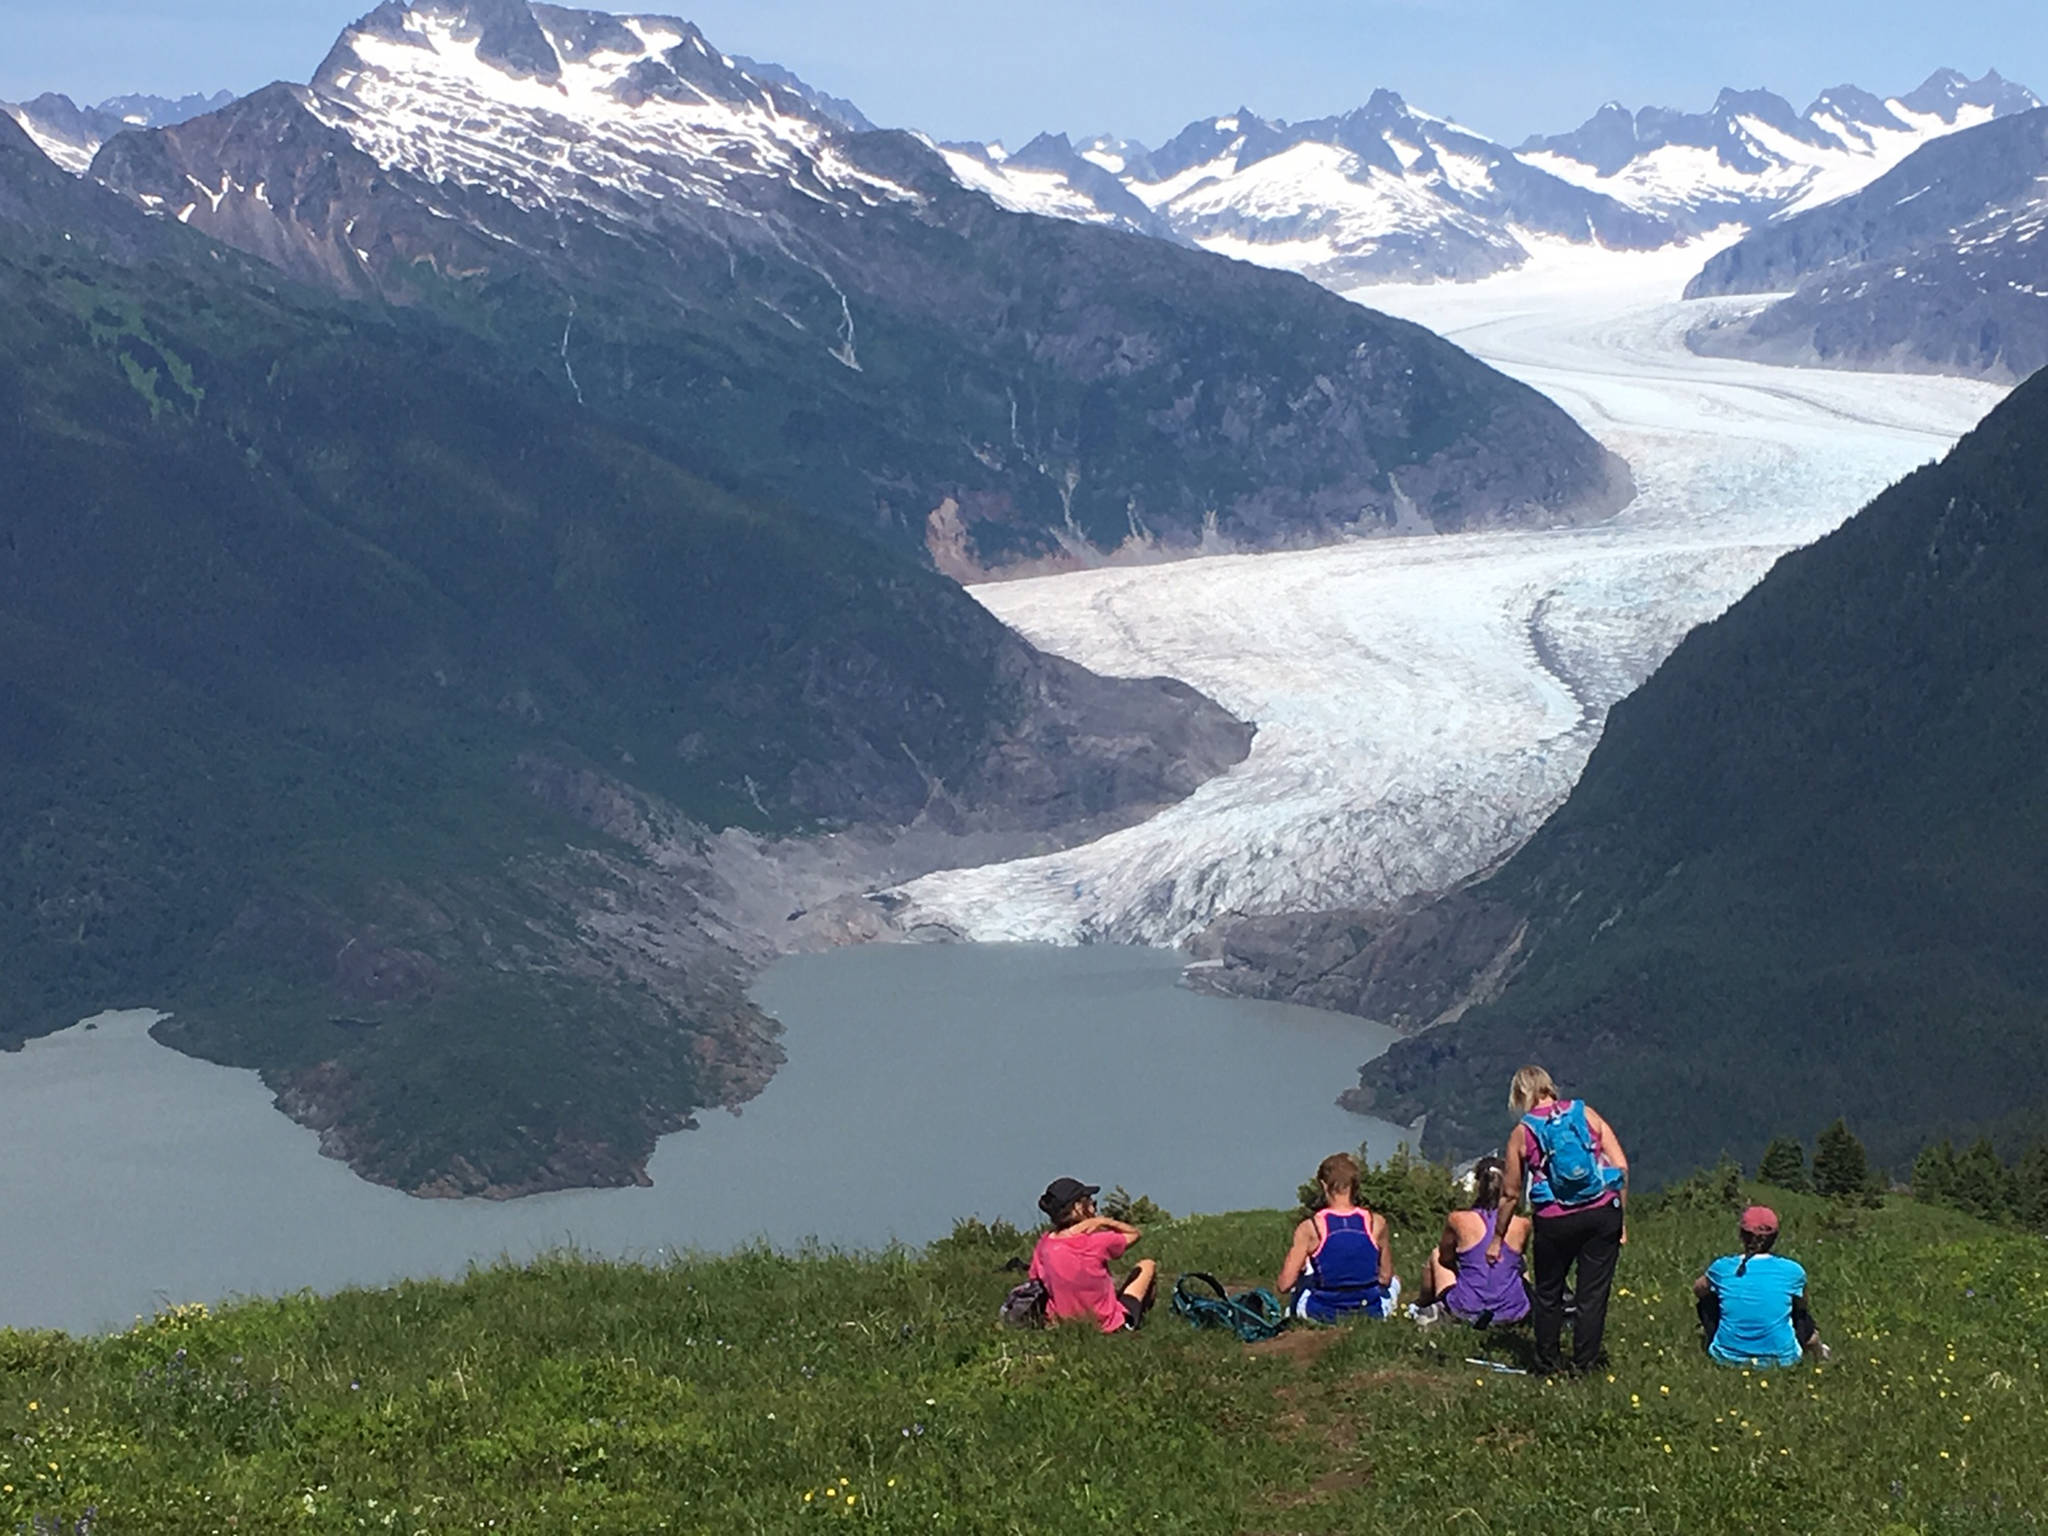 The Mendenhall Glacier viewed from the top of Thunder Mountain on Friday, June 28, 2019. (Courtesy Photo | Deborah Rudis)